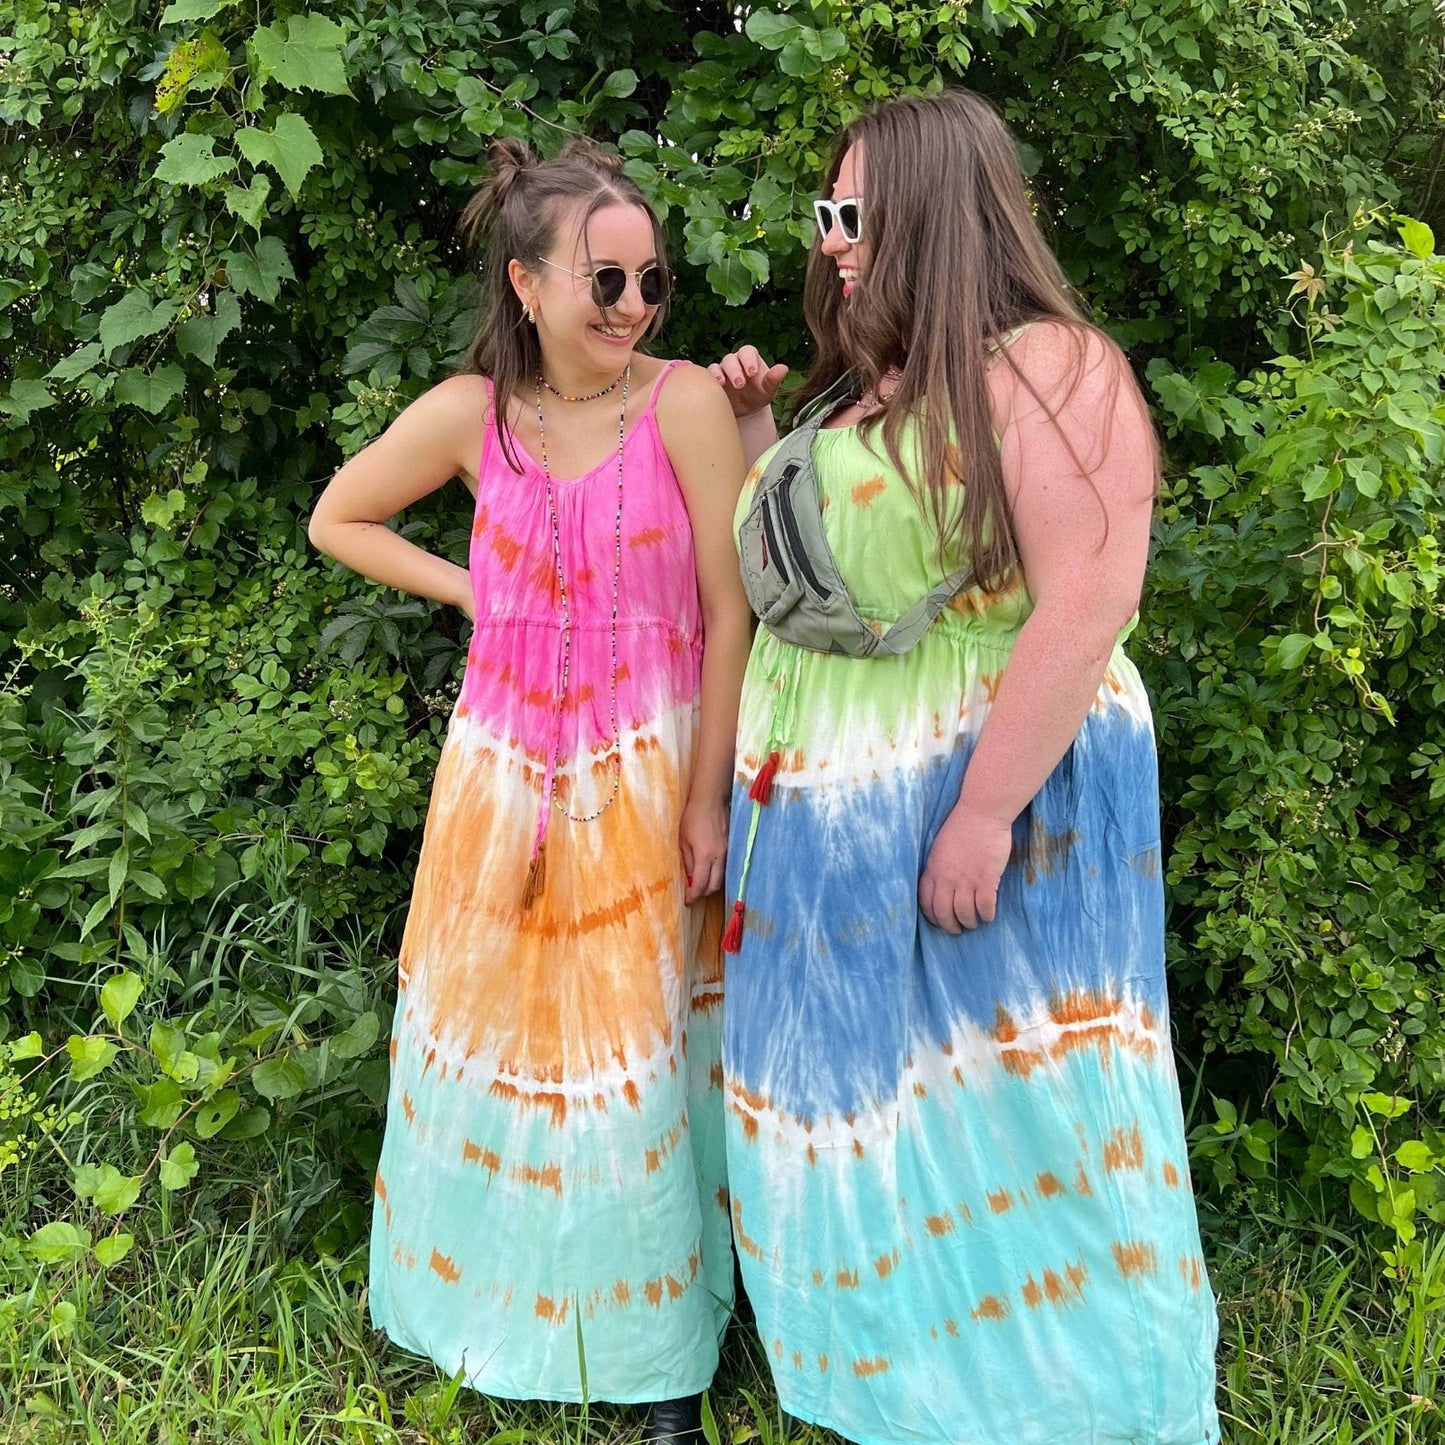 Two models are laughing while wearing the pastel tie dye maxi dresses in both colors blue breeze and rainbow sherbet.